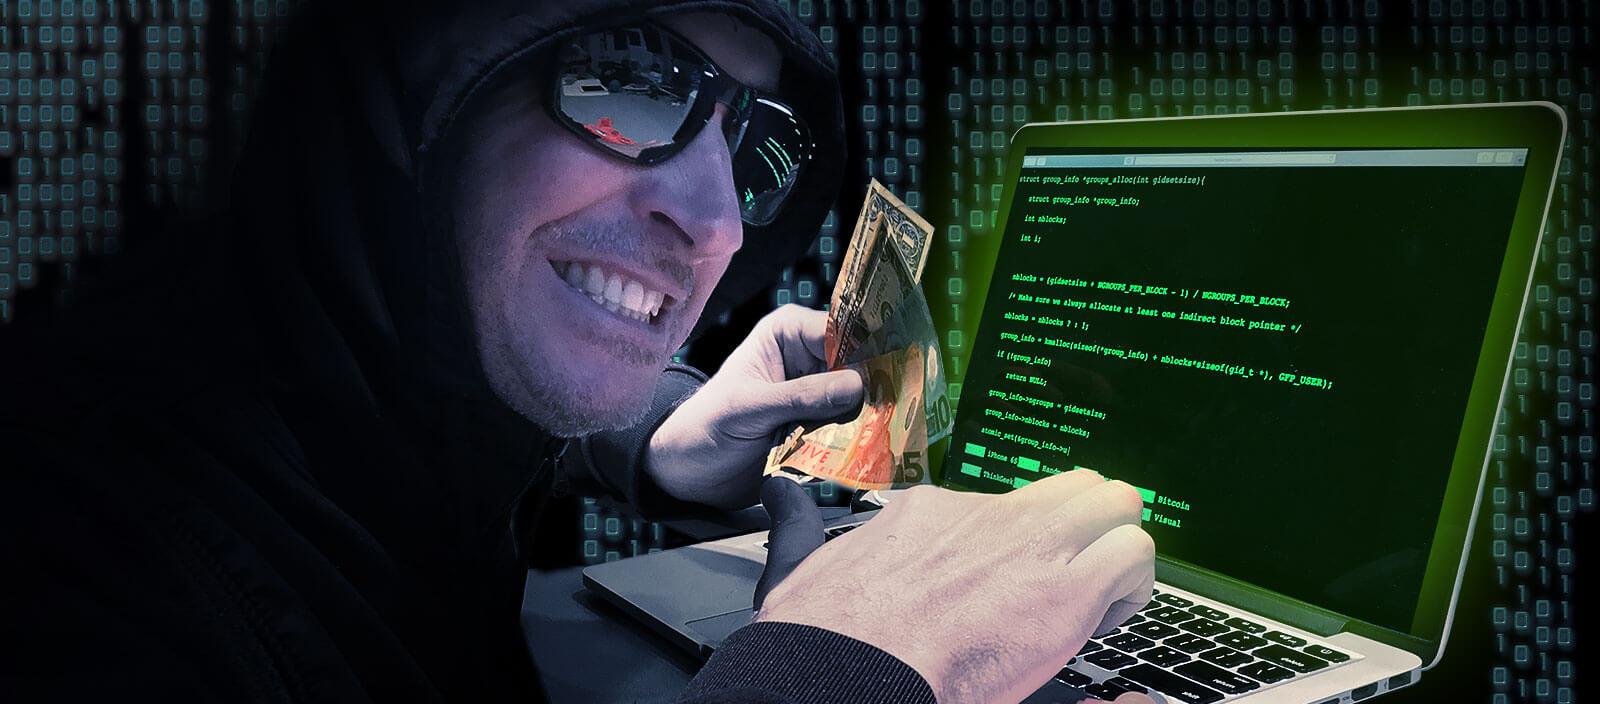 Top 6 funniest and most overused images of hackers